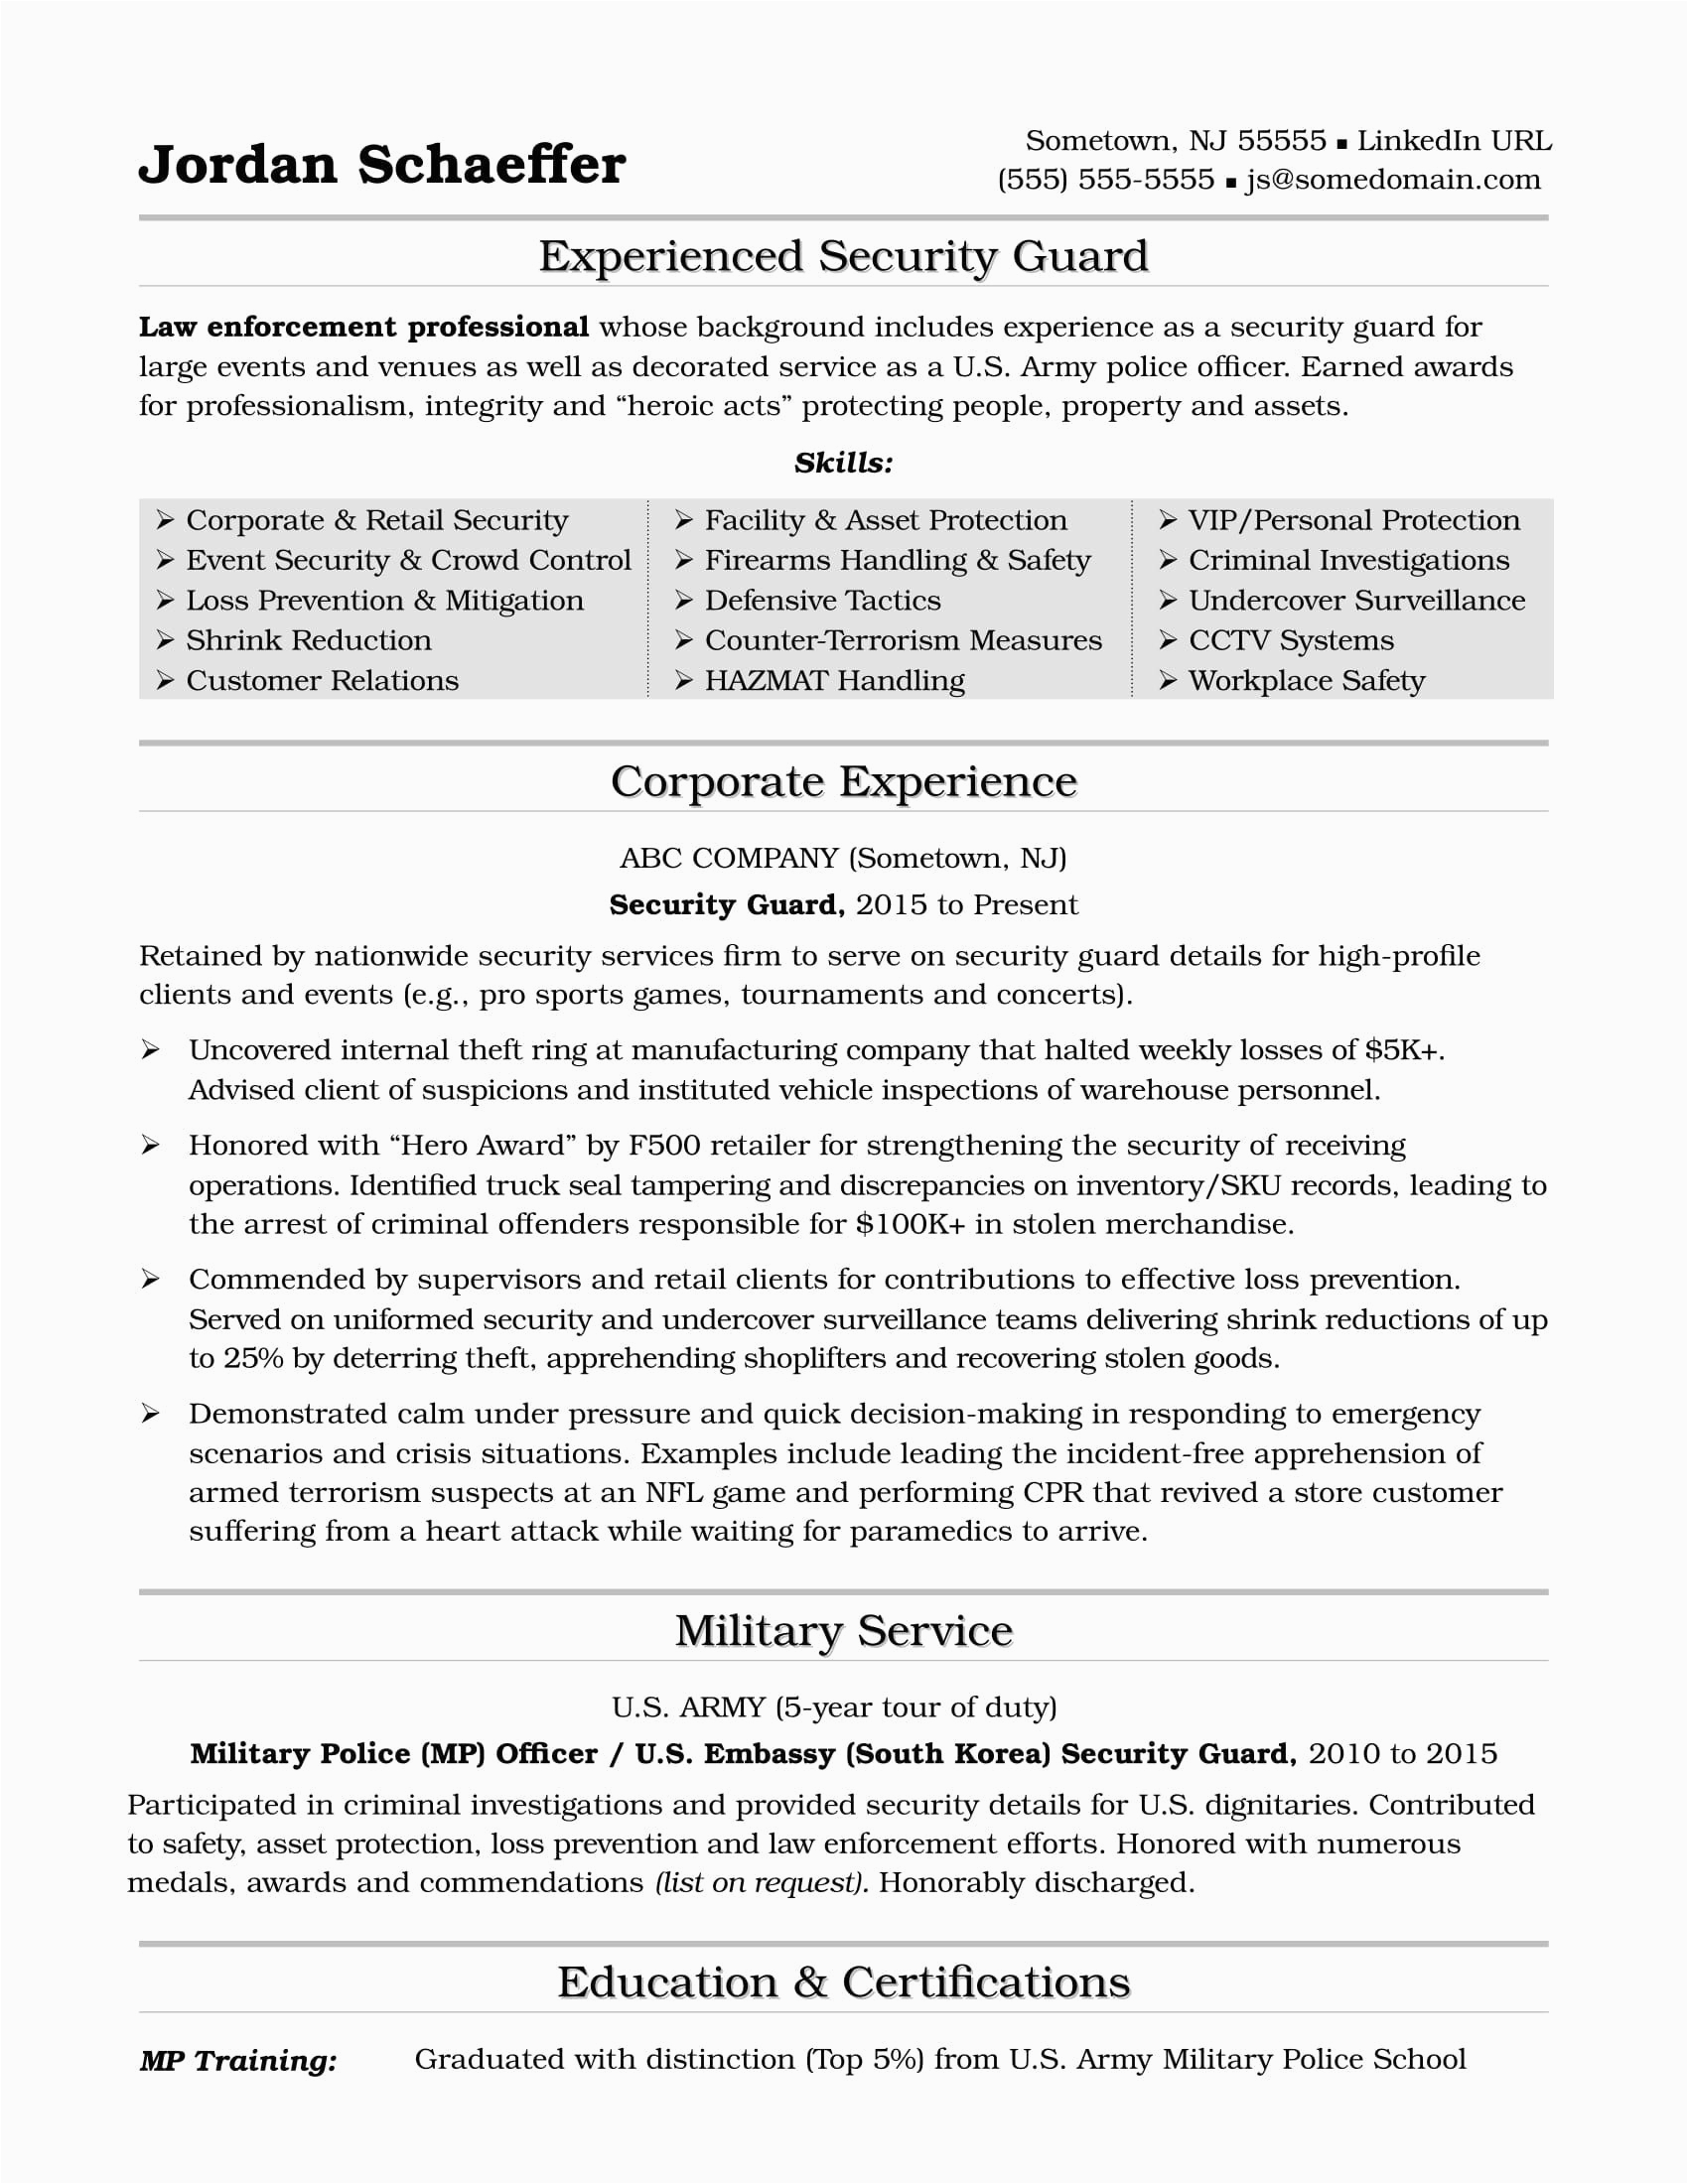 Free Sample Resume for Security Guard Security Guard Resume Sample